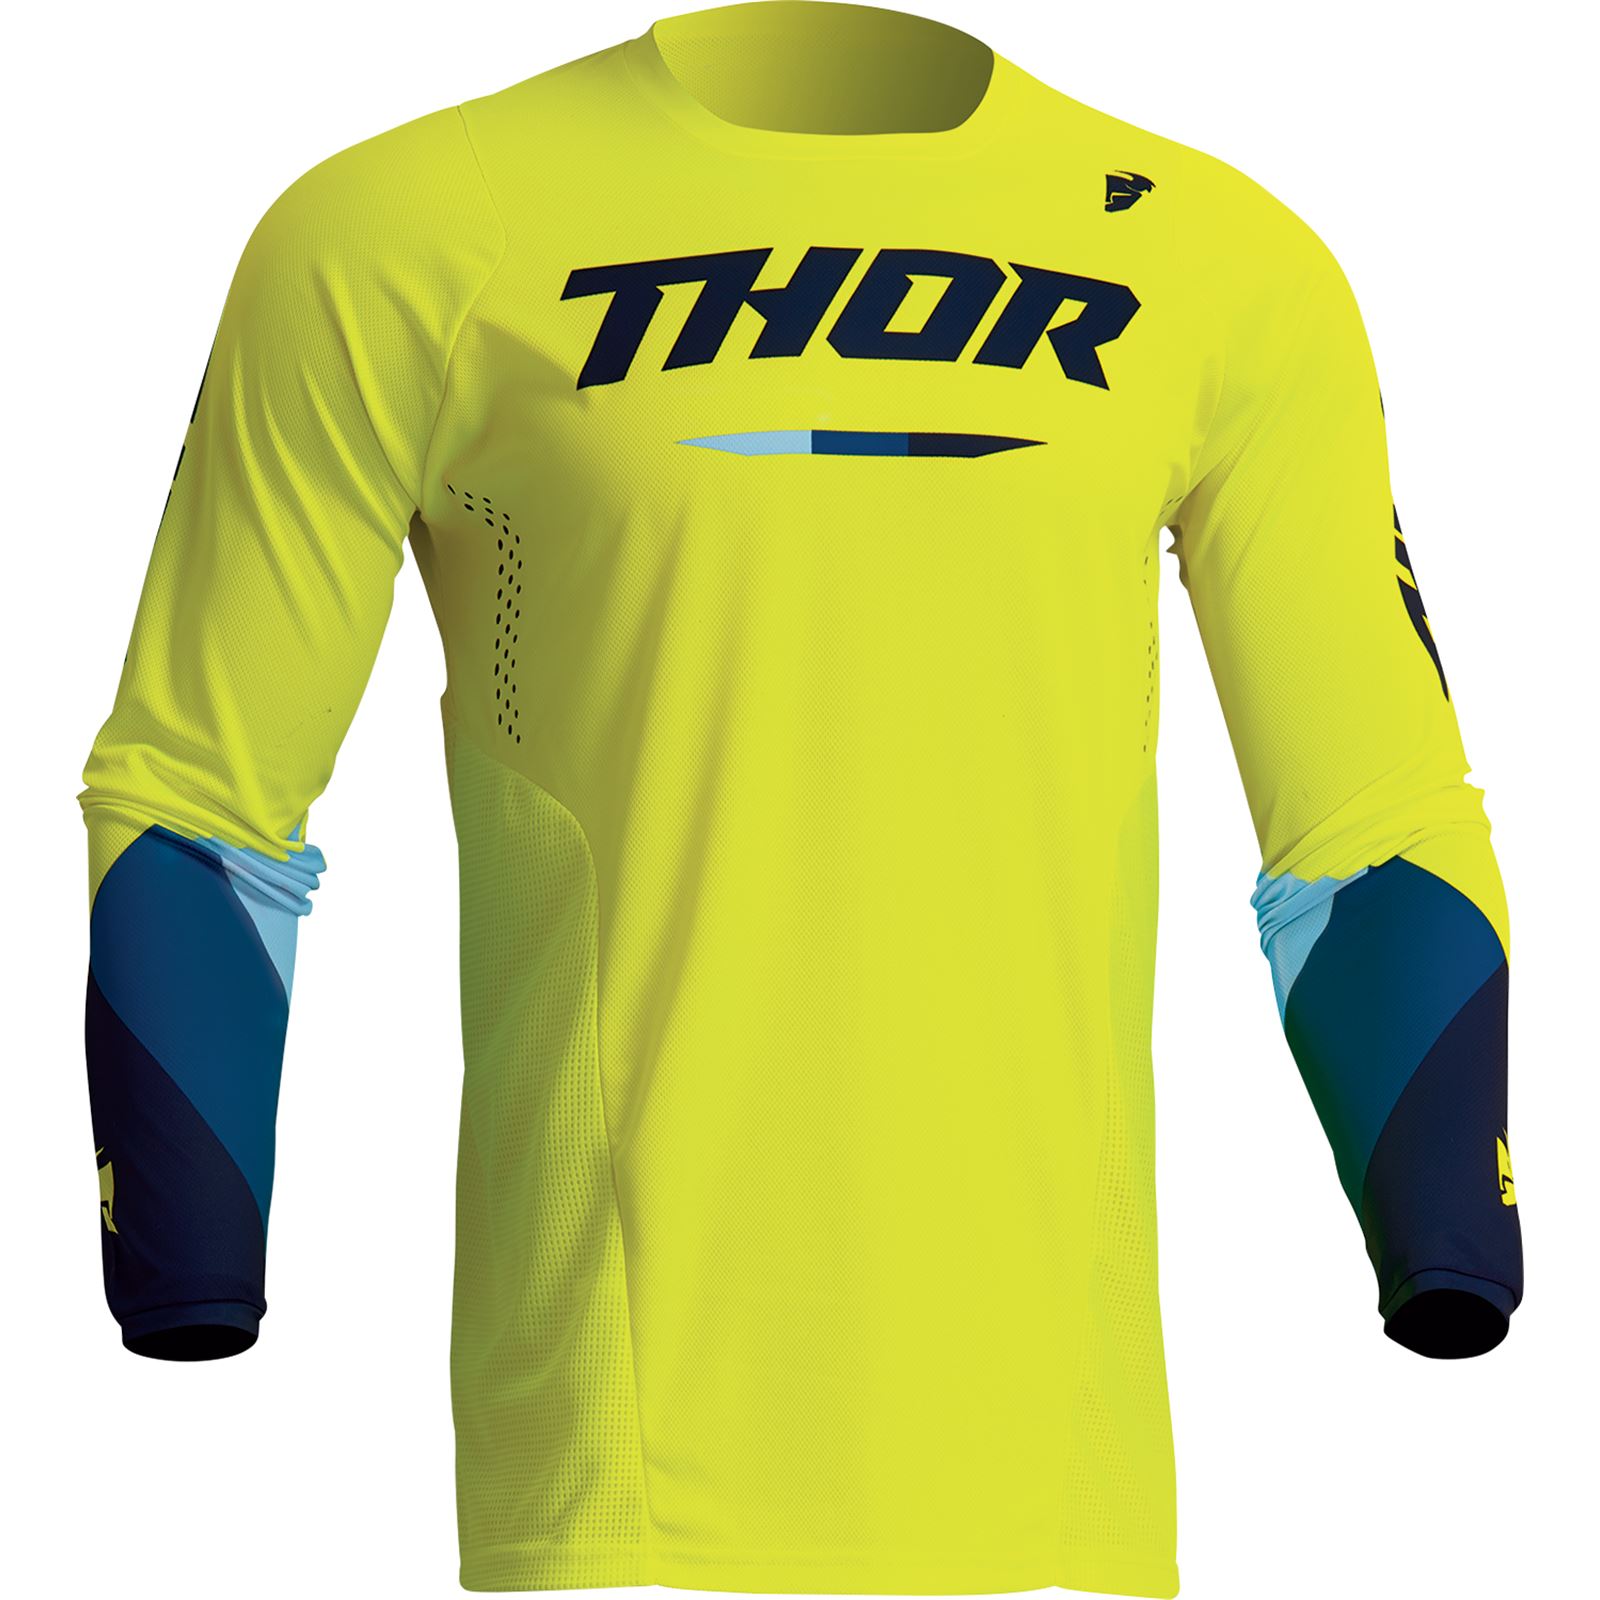 Thor Youth Pulse Tactic Jersey - Acid - 2XS